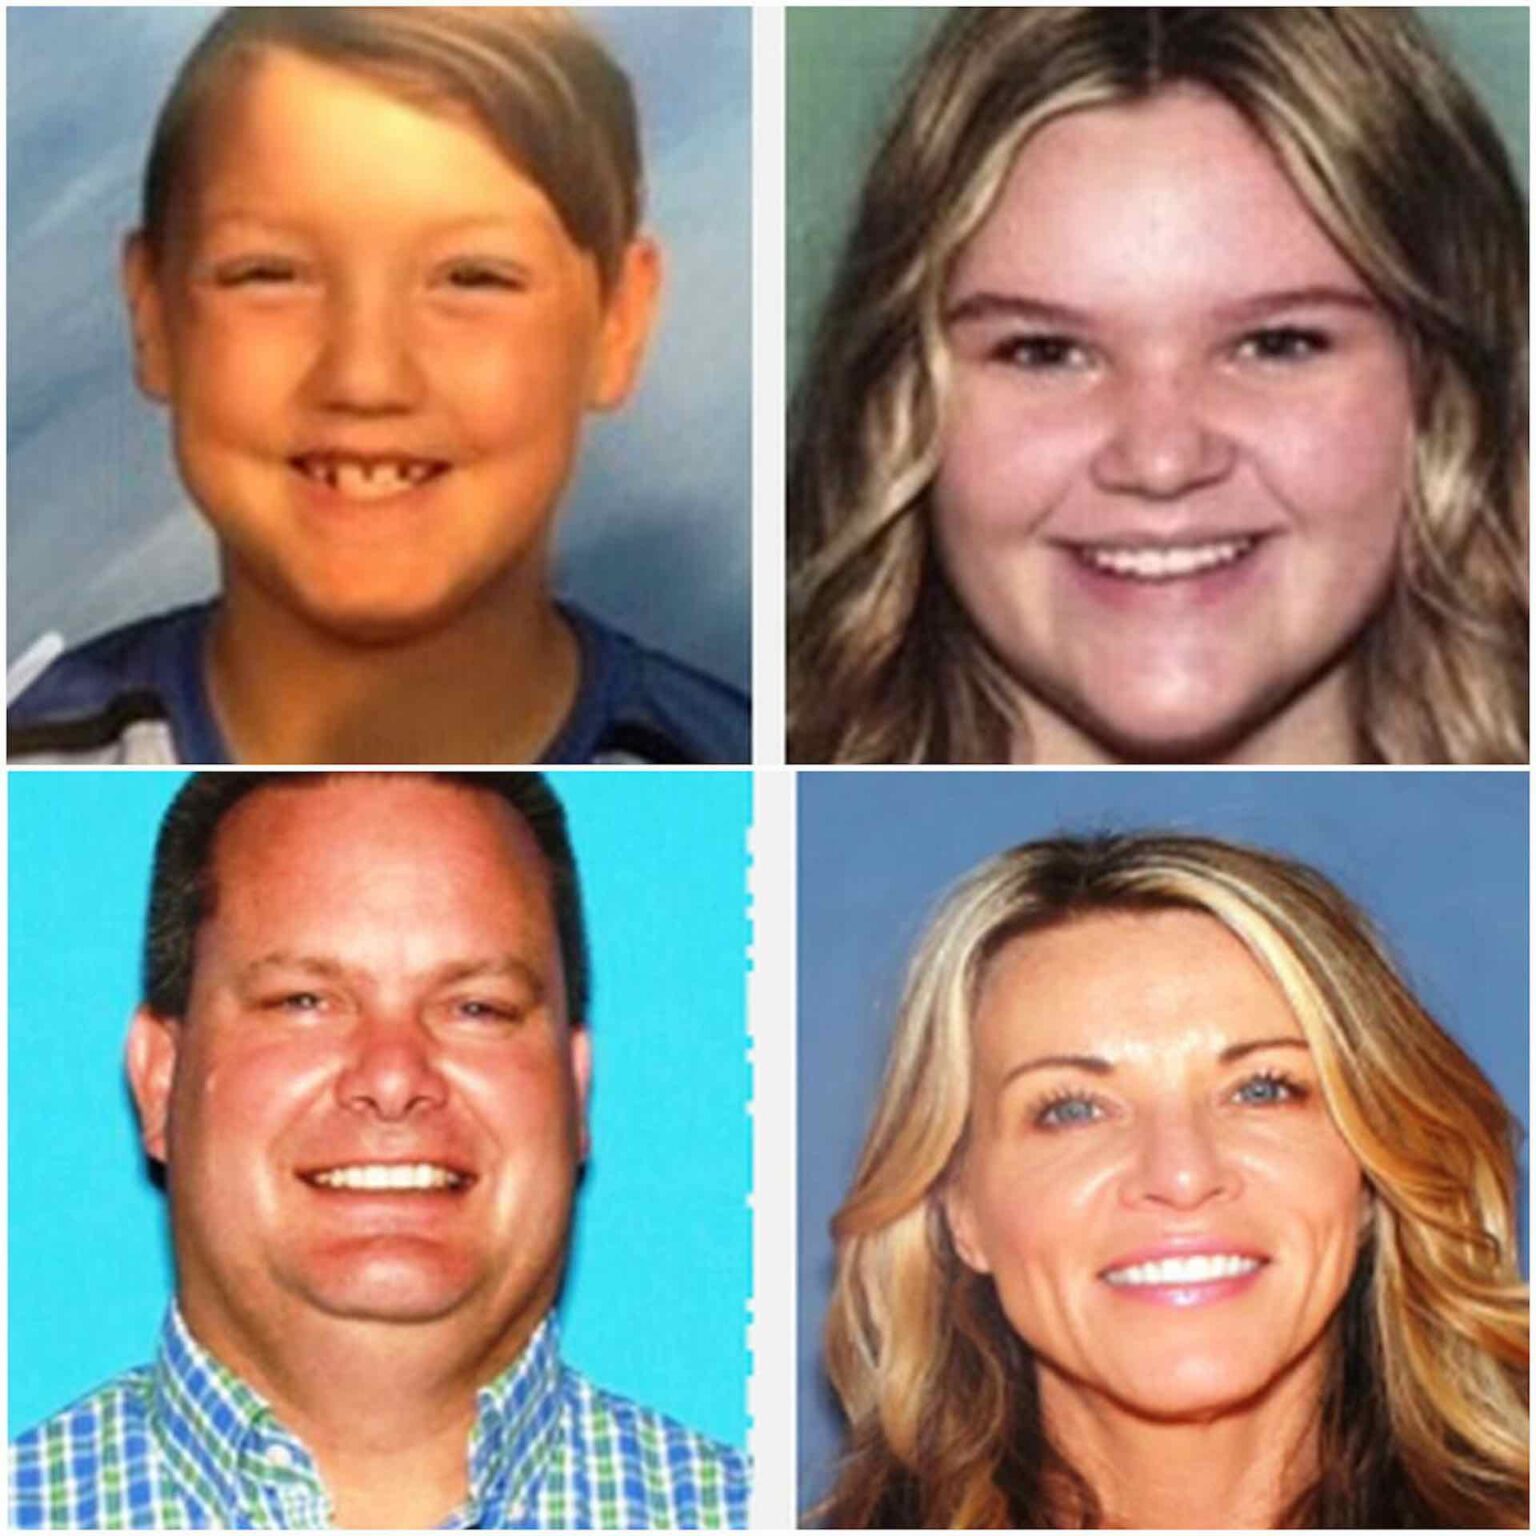 Lori Vallow and Chad Daybell are are suspected of killing both of Vallow's children. New updates have been reported in the case.